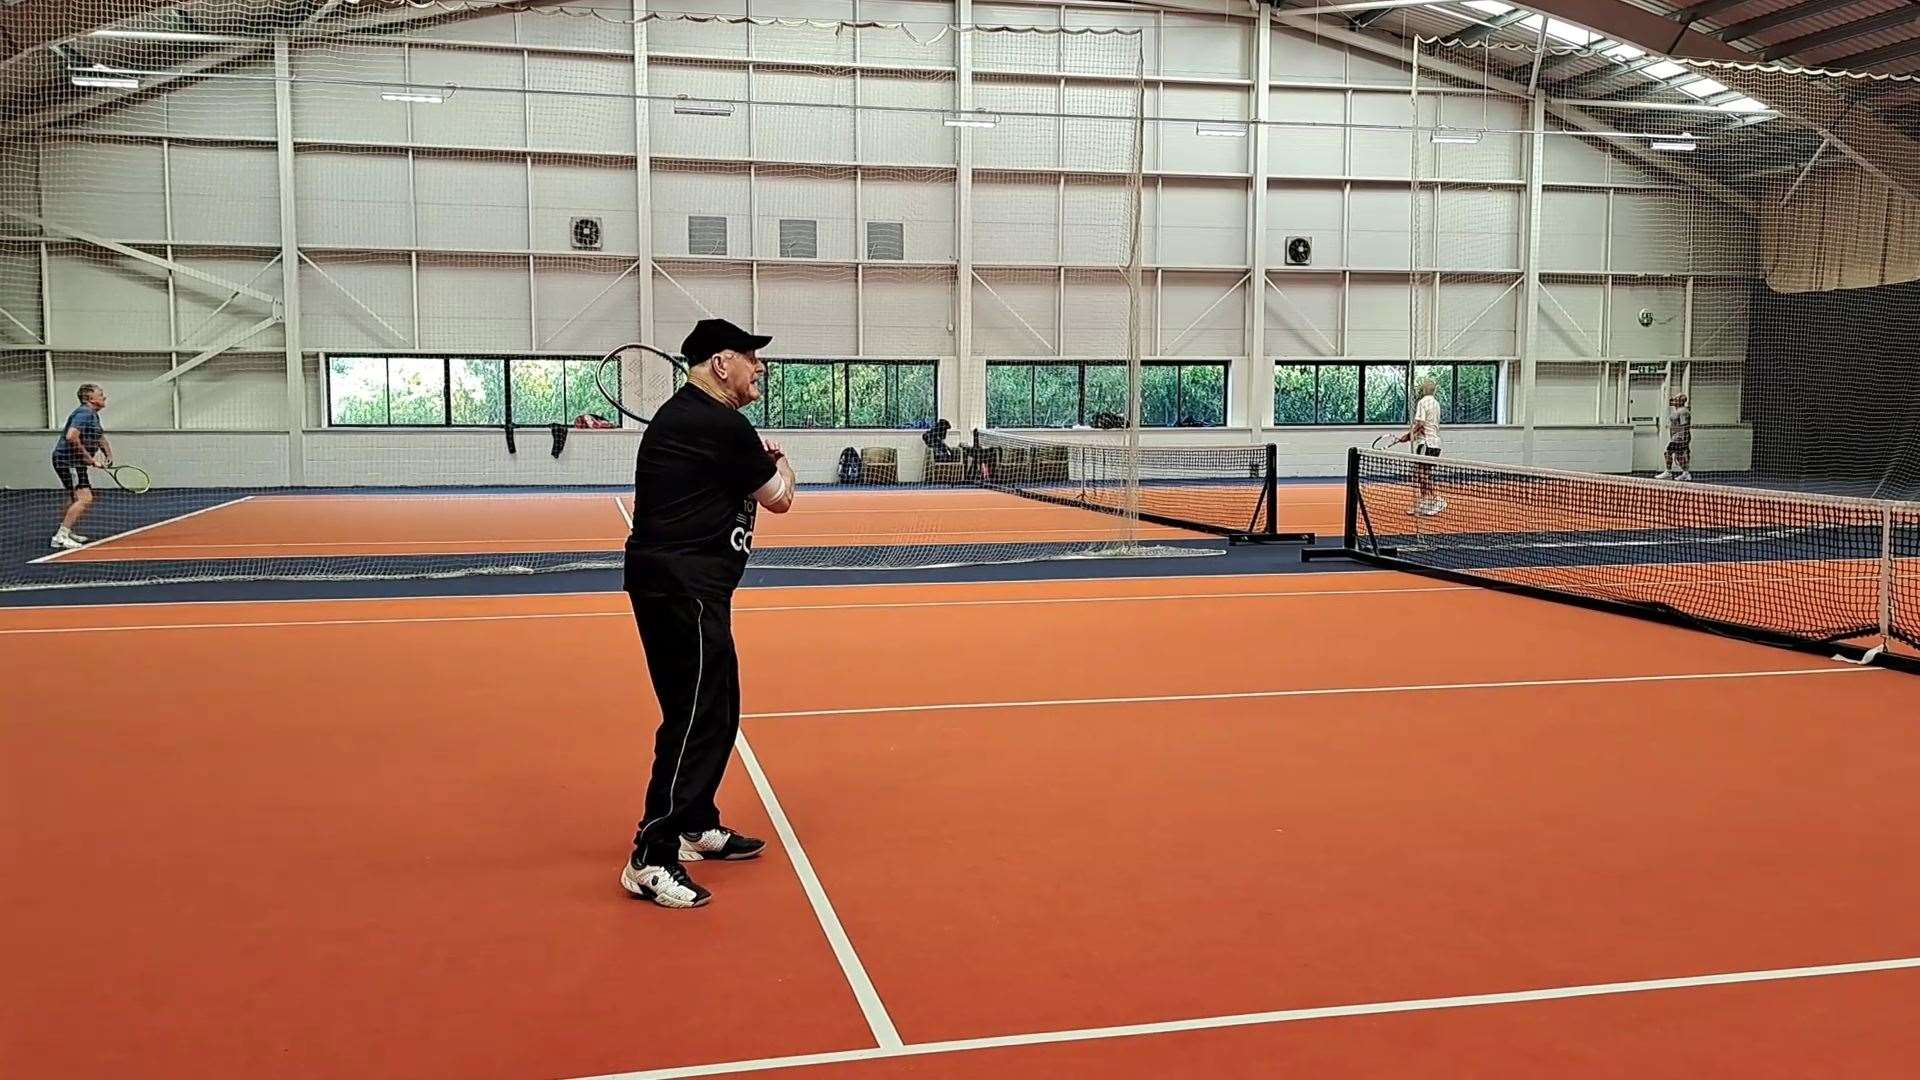 Brian said he has managed to stay fit and healthy by regularly playing tennis